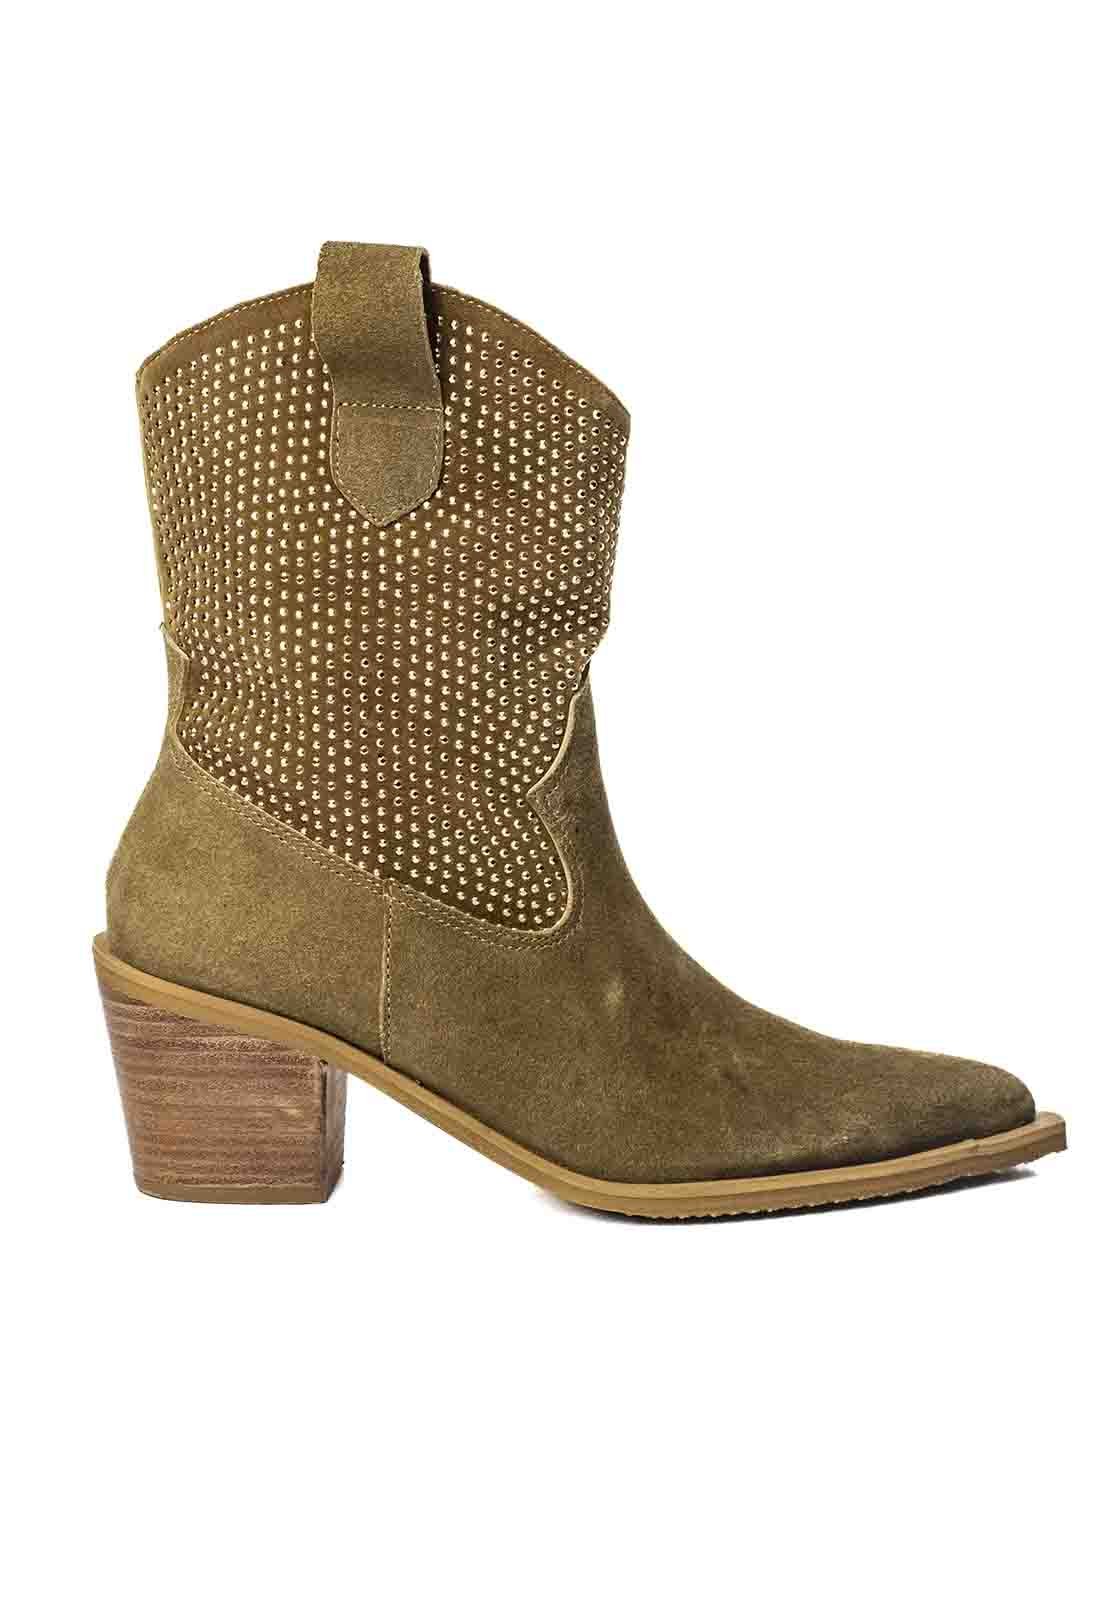 Bota Couro Texana Country Western Cano Medio Strass Bege Bege 2